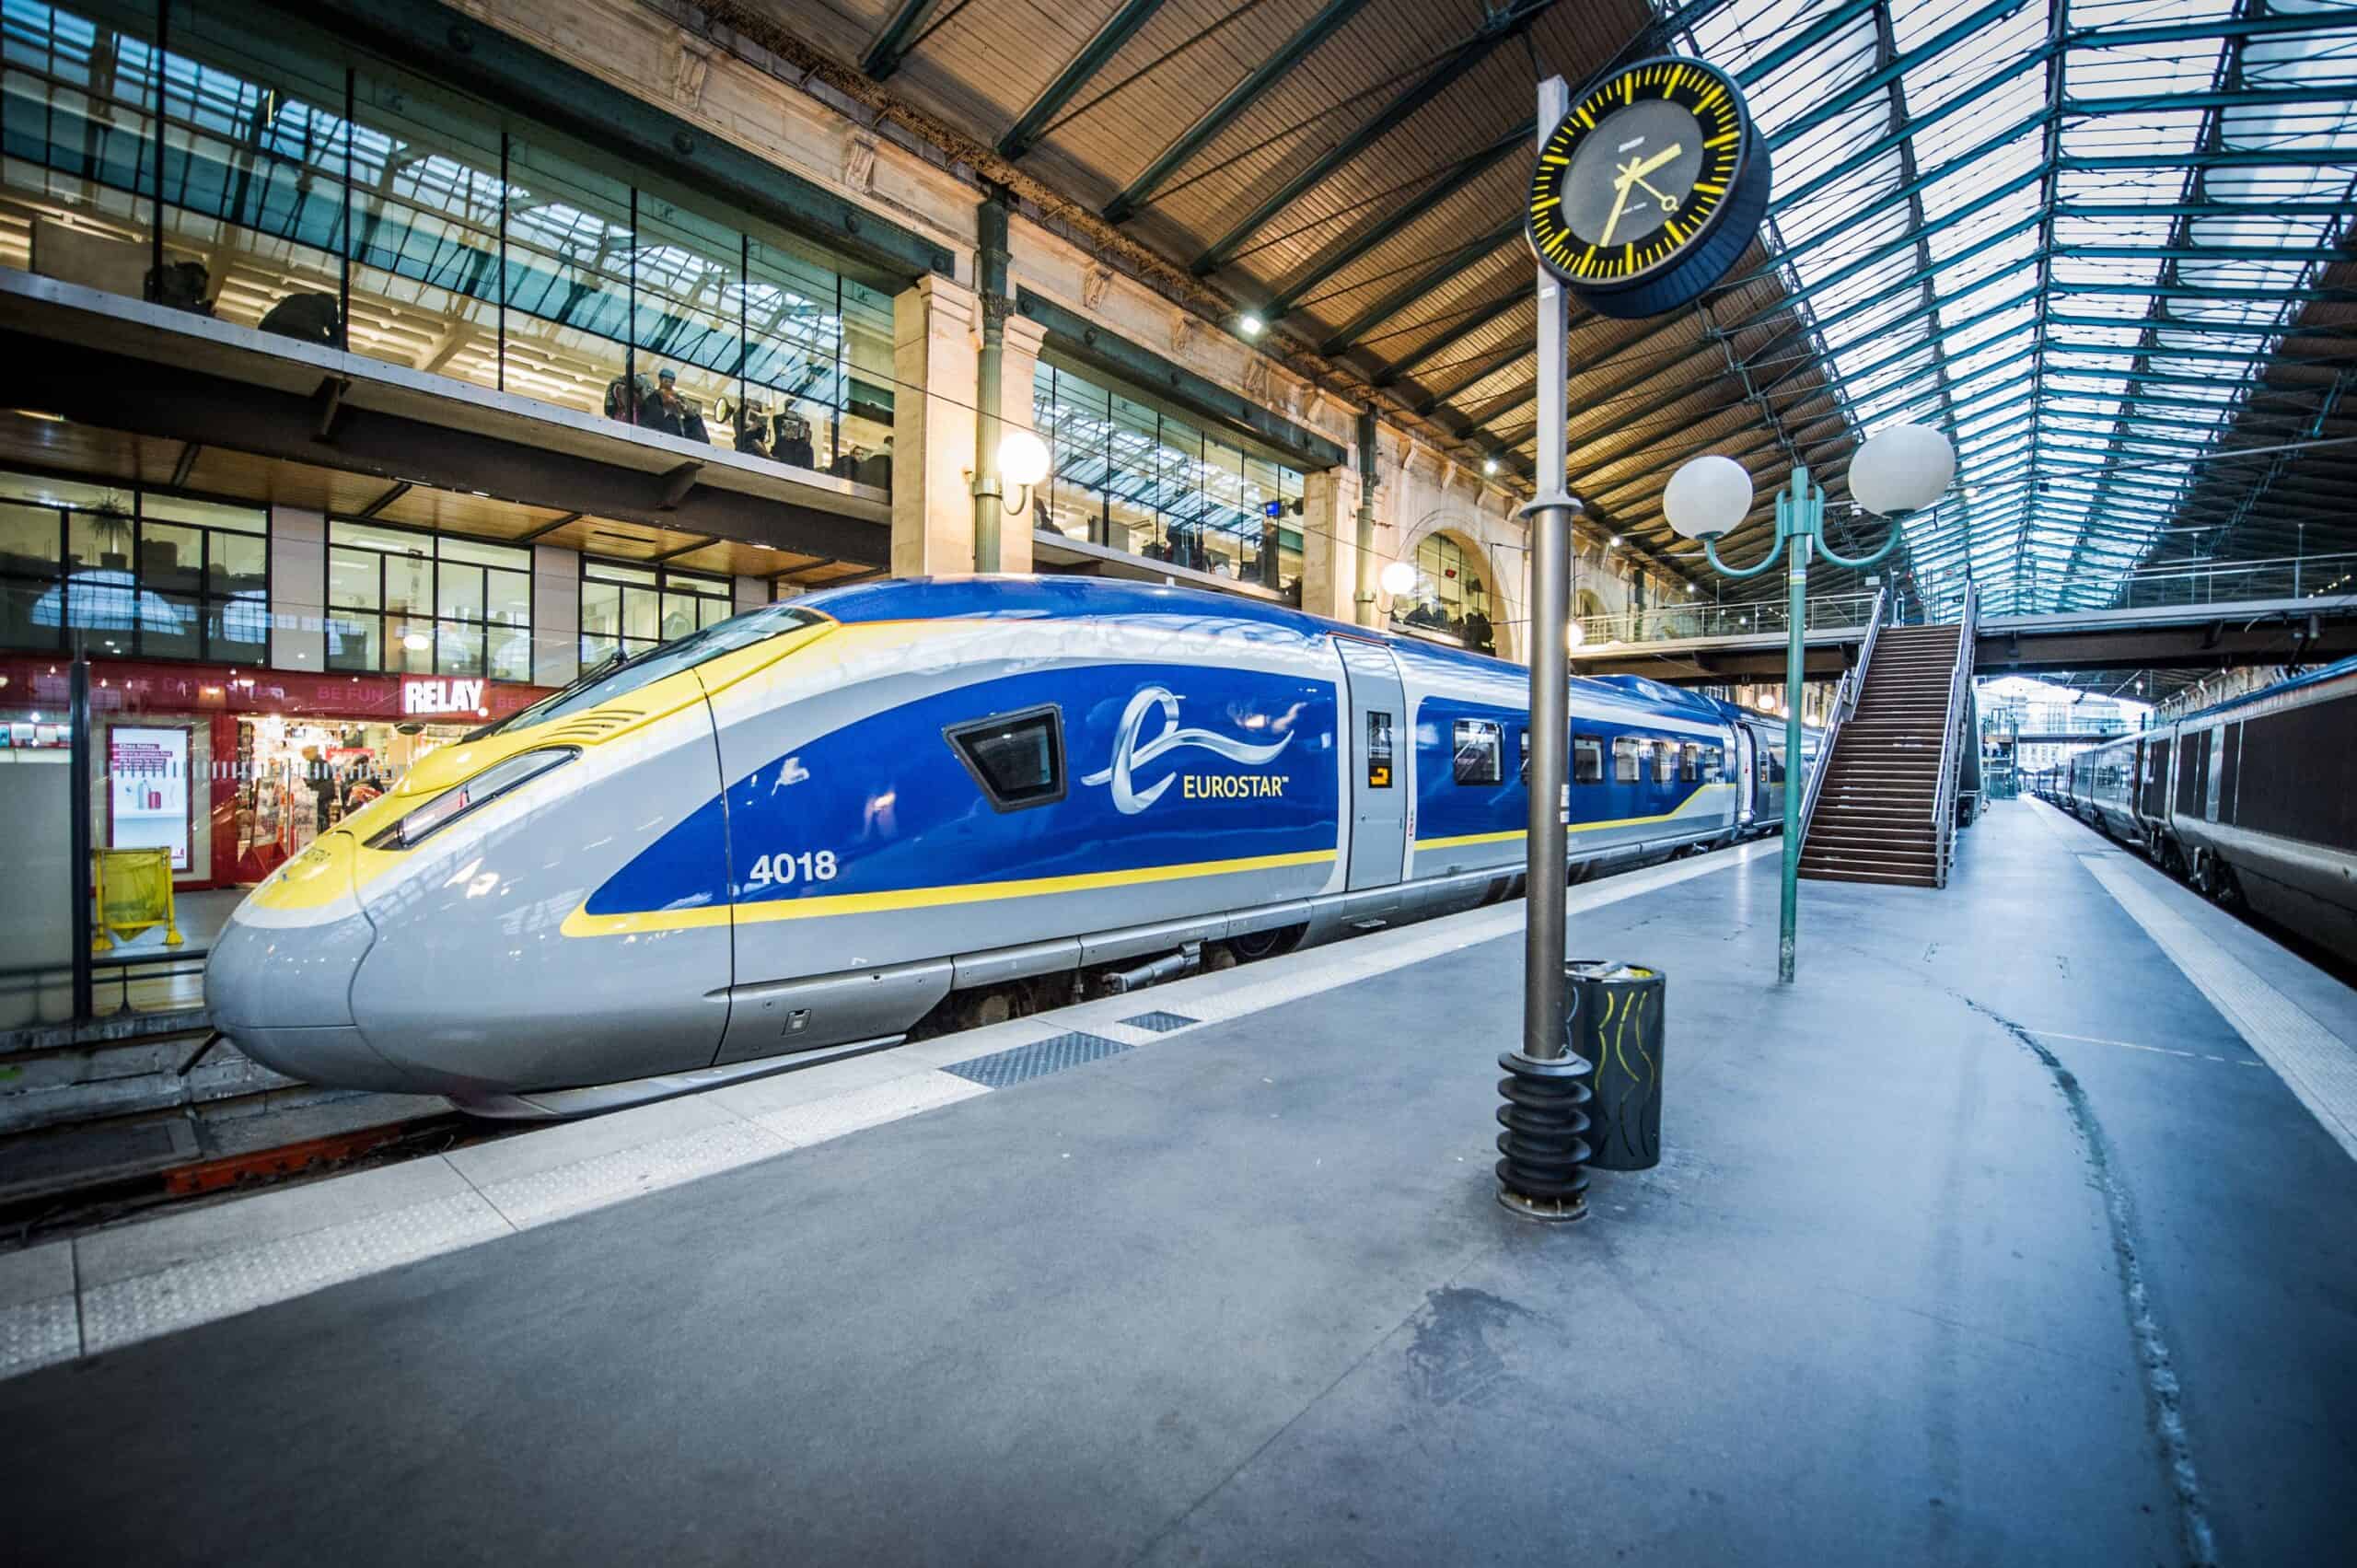 Eurostar in chaos – all services cancelled following flooding of a tunnel